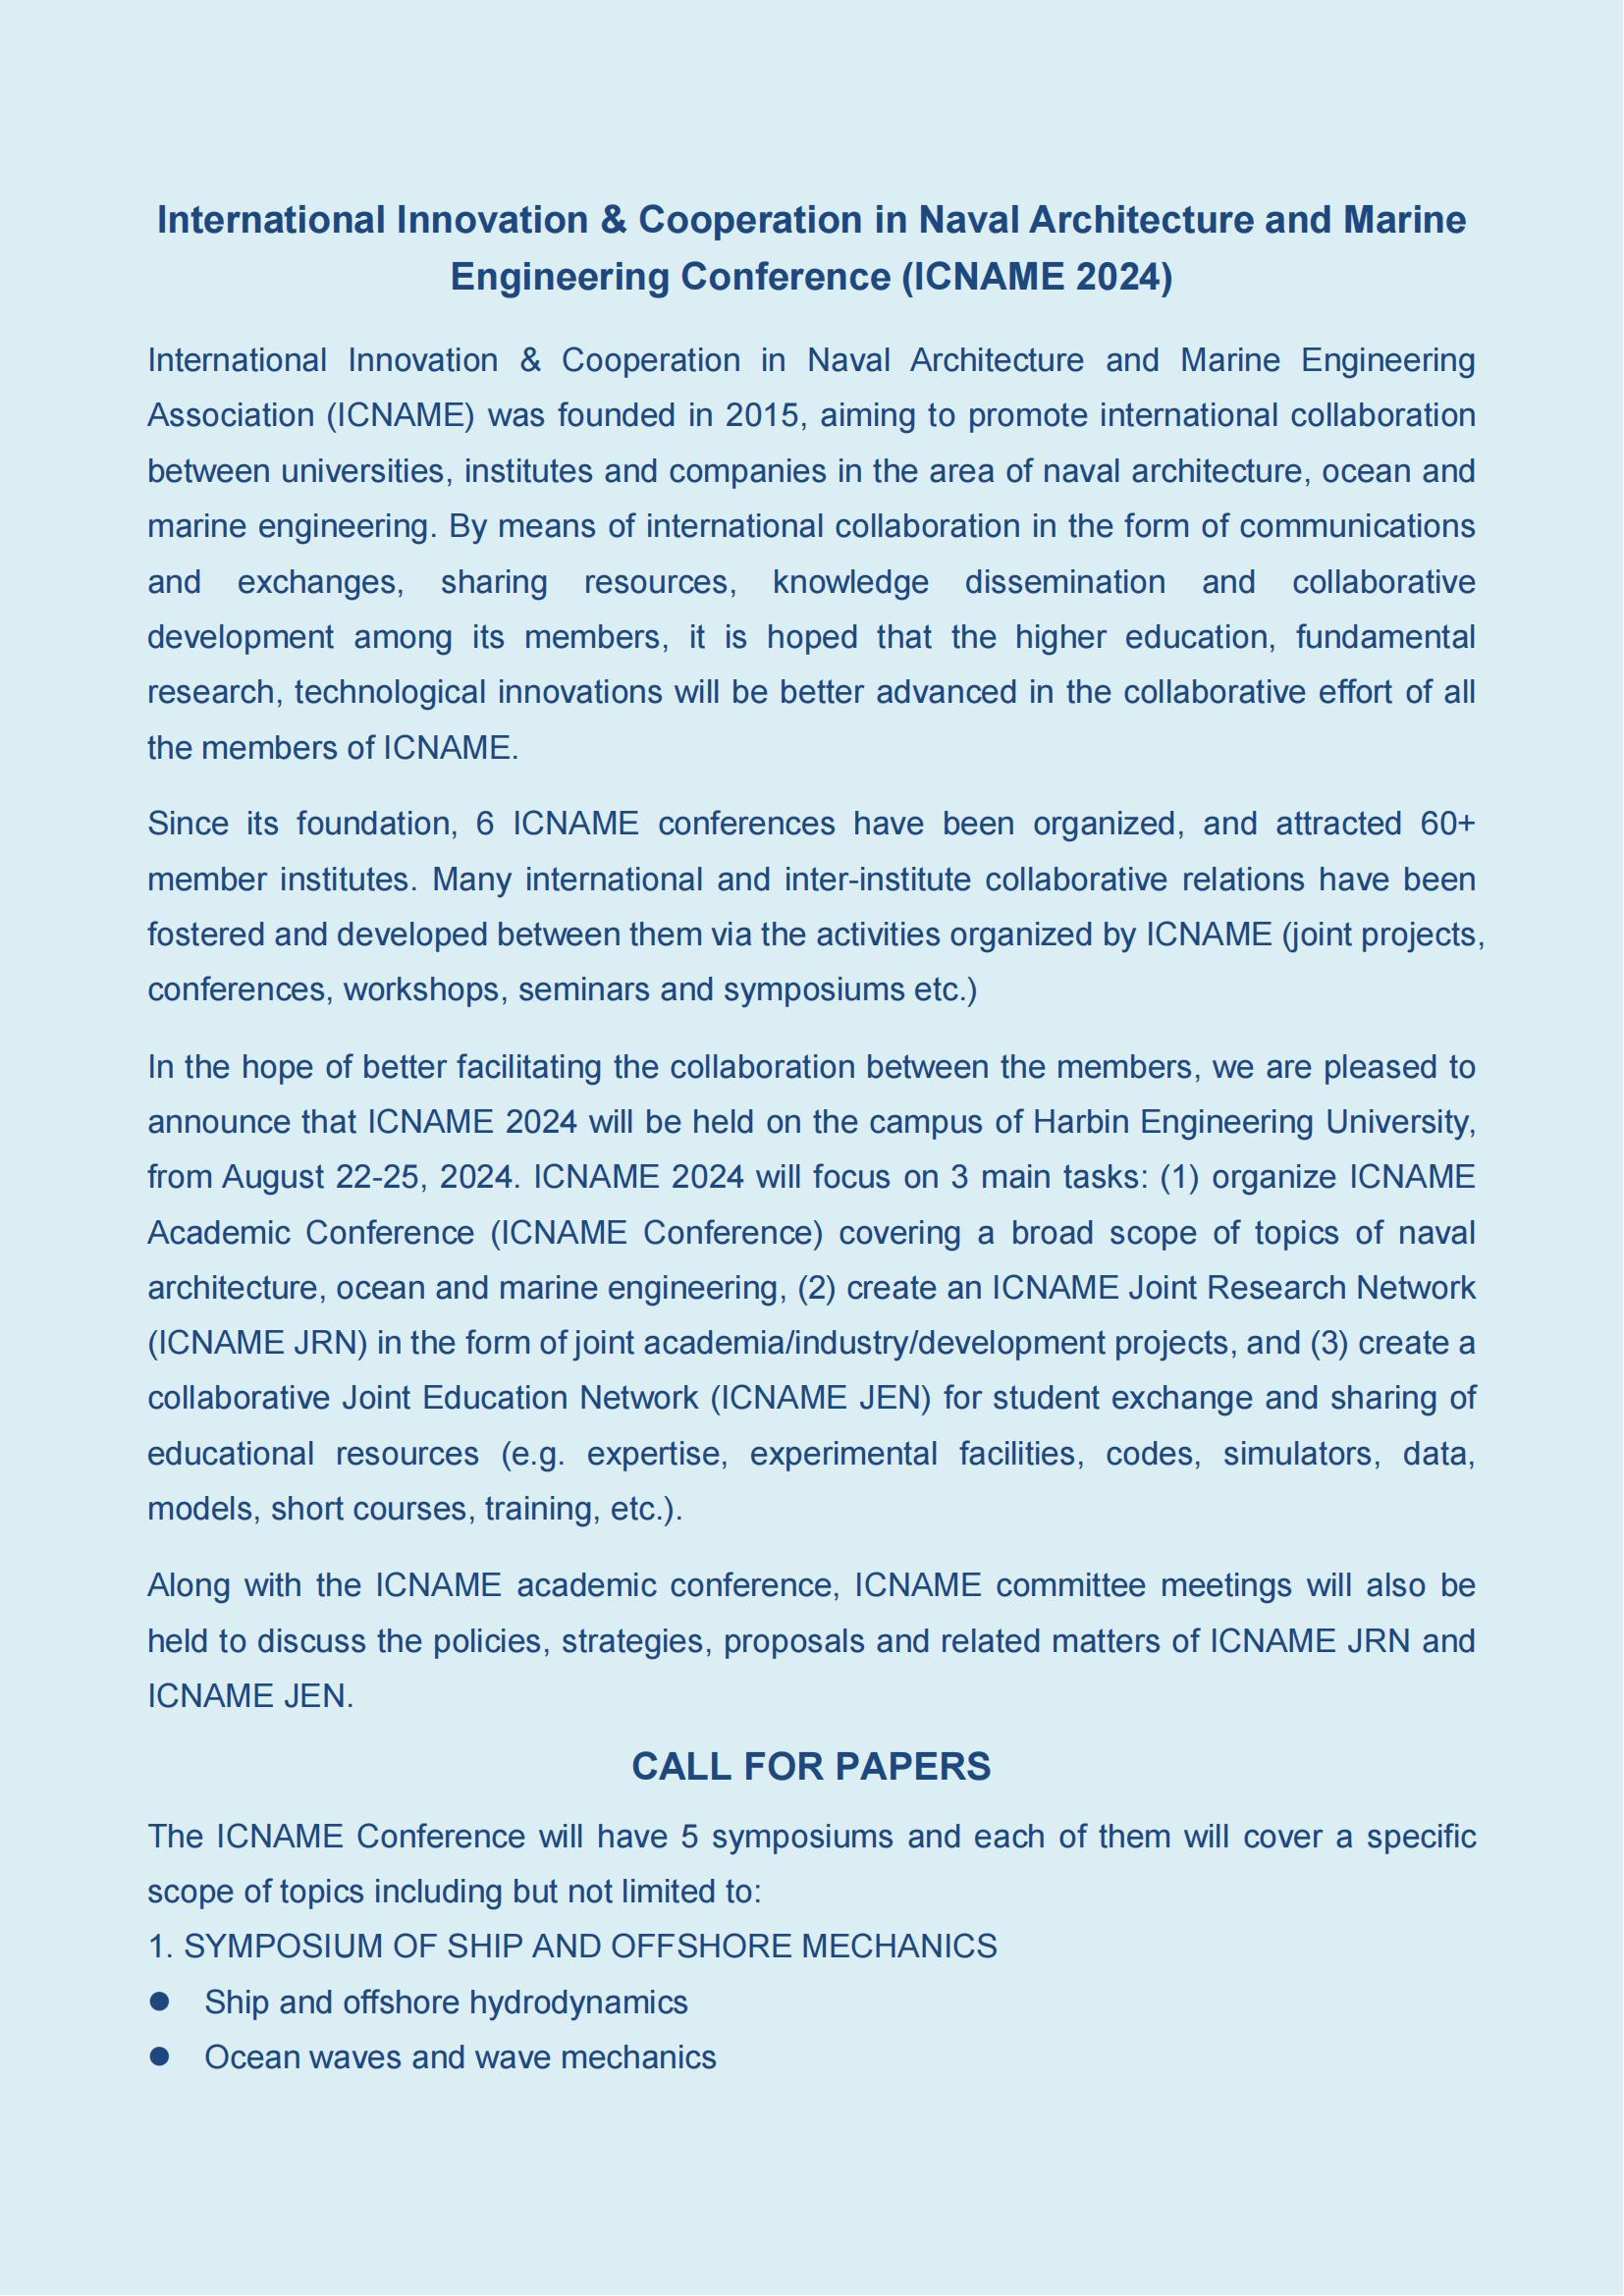 ICNAME2024 2nd Announcement and Call for Papers-Revised-2_01.jpg